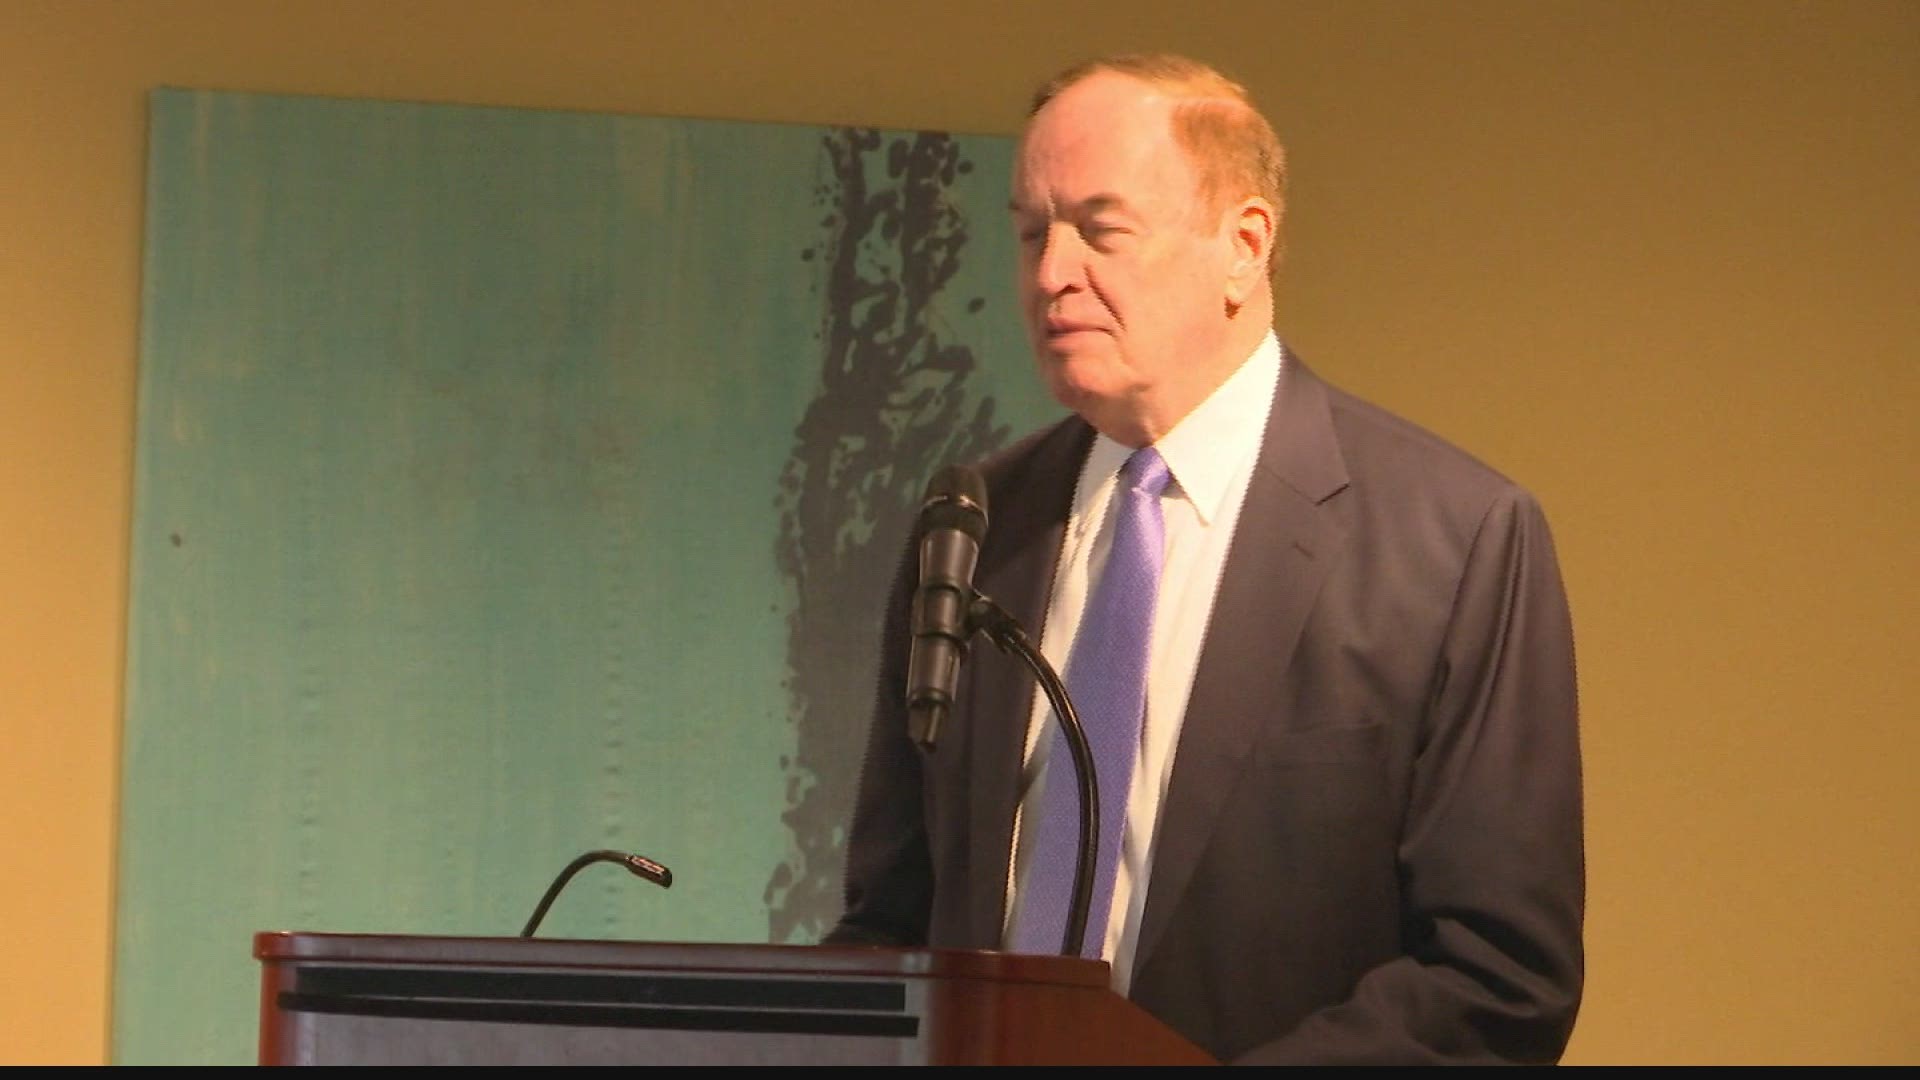 “For everything, there is a season,” Sen. Richard Shelby said.